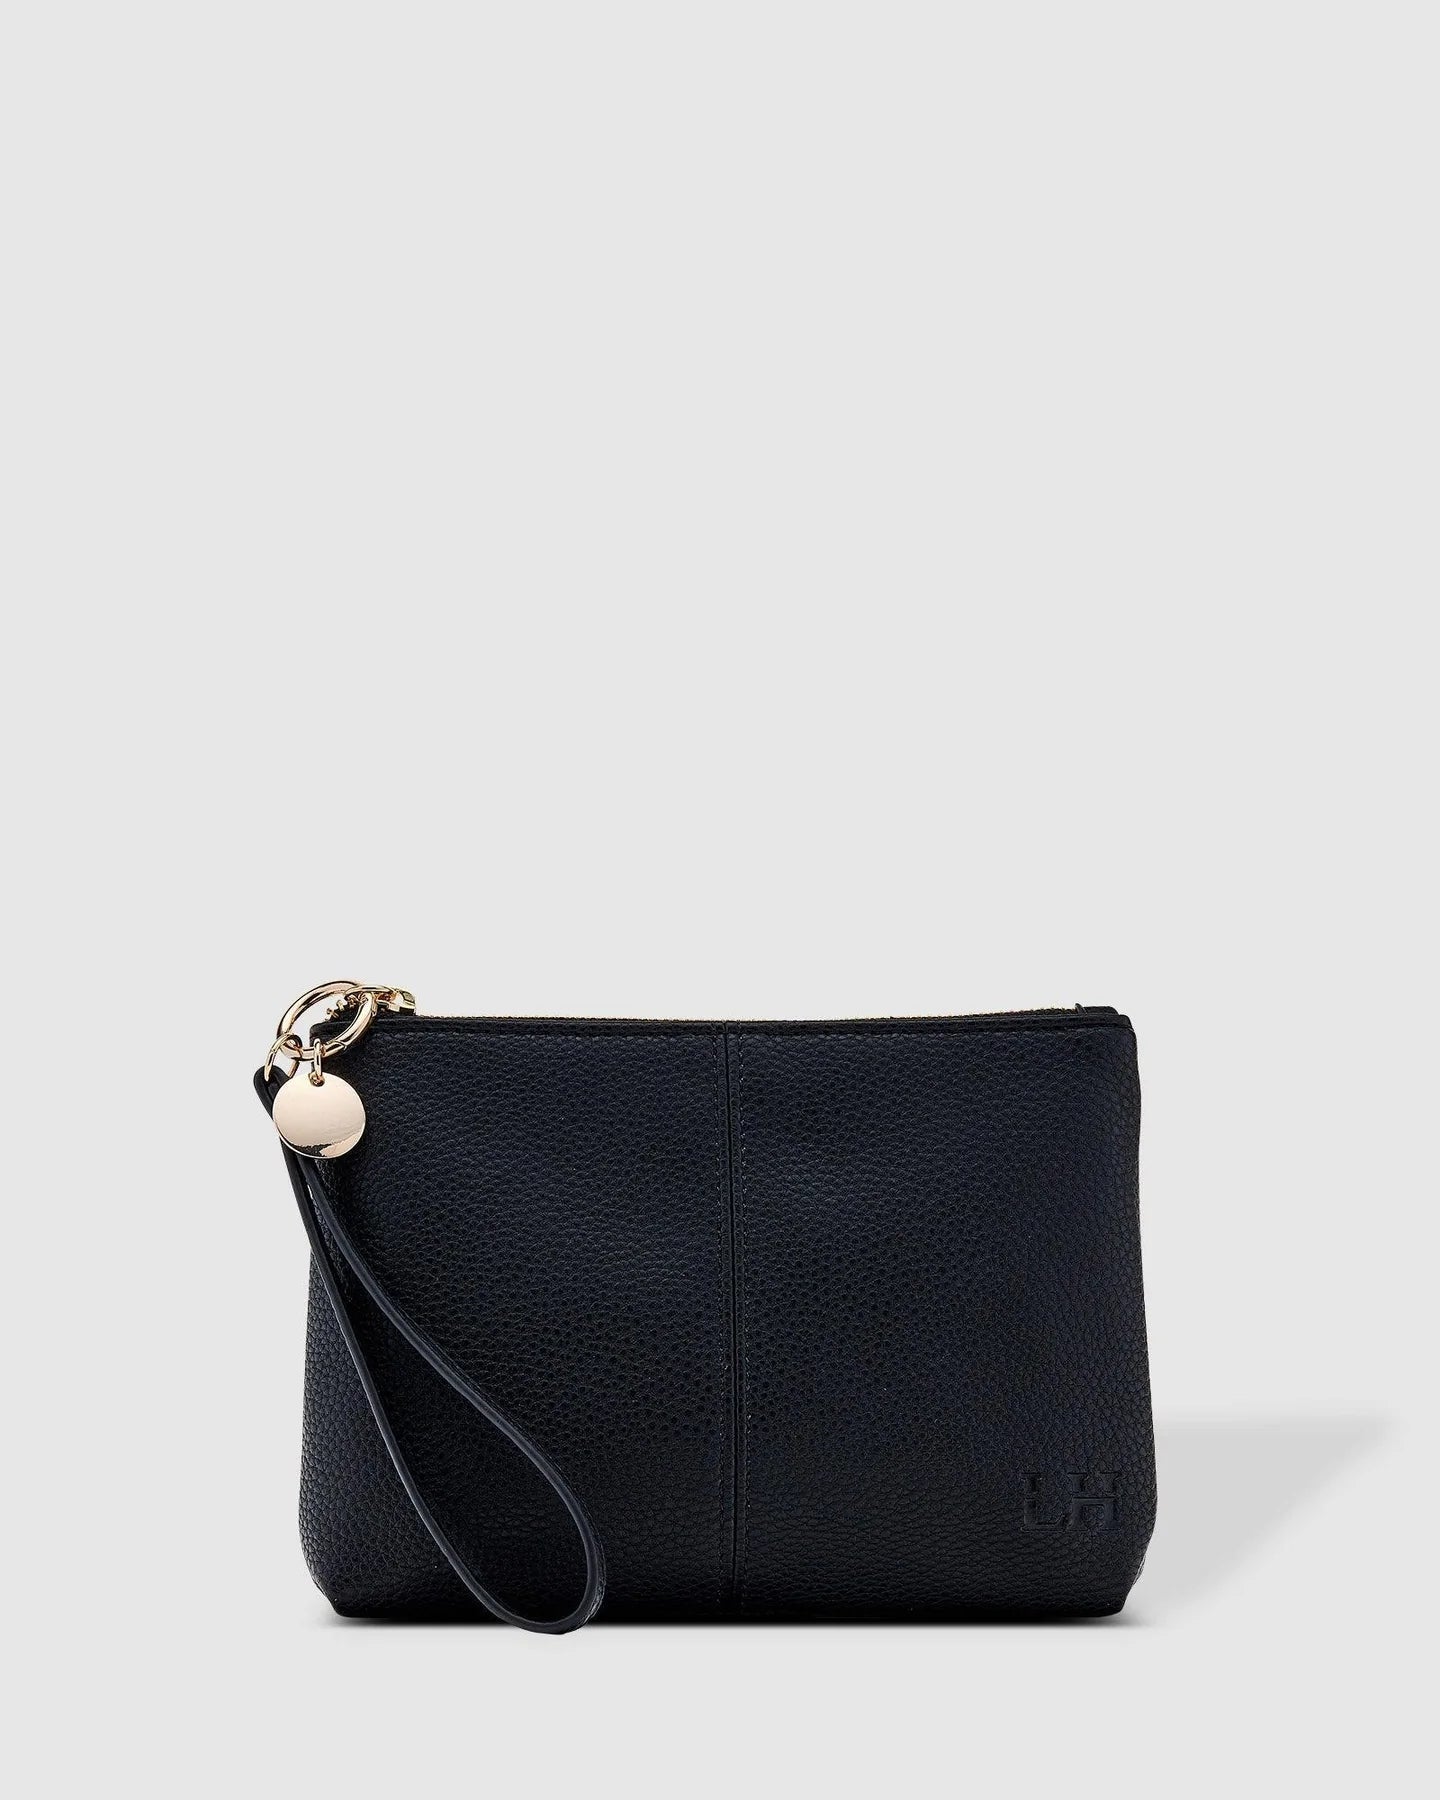 Baby Gracie Clutch (Black) - Something For Me​​